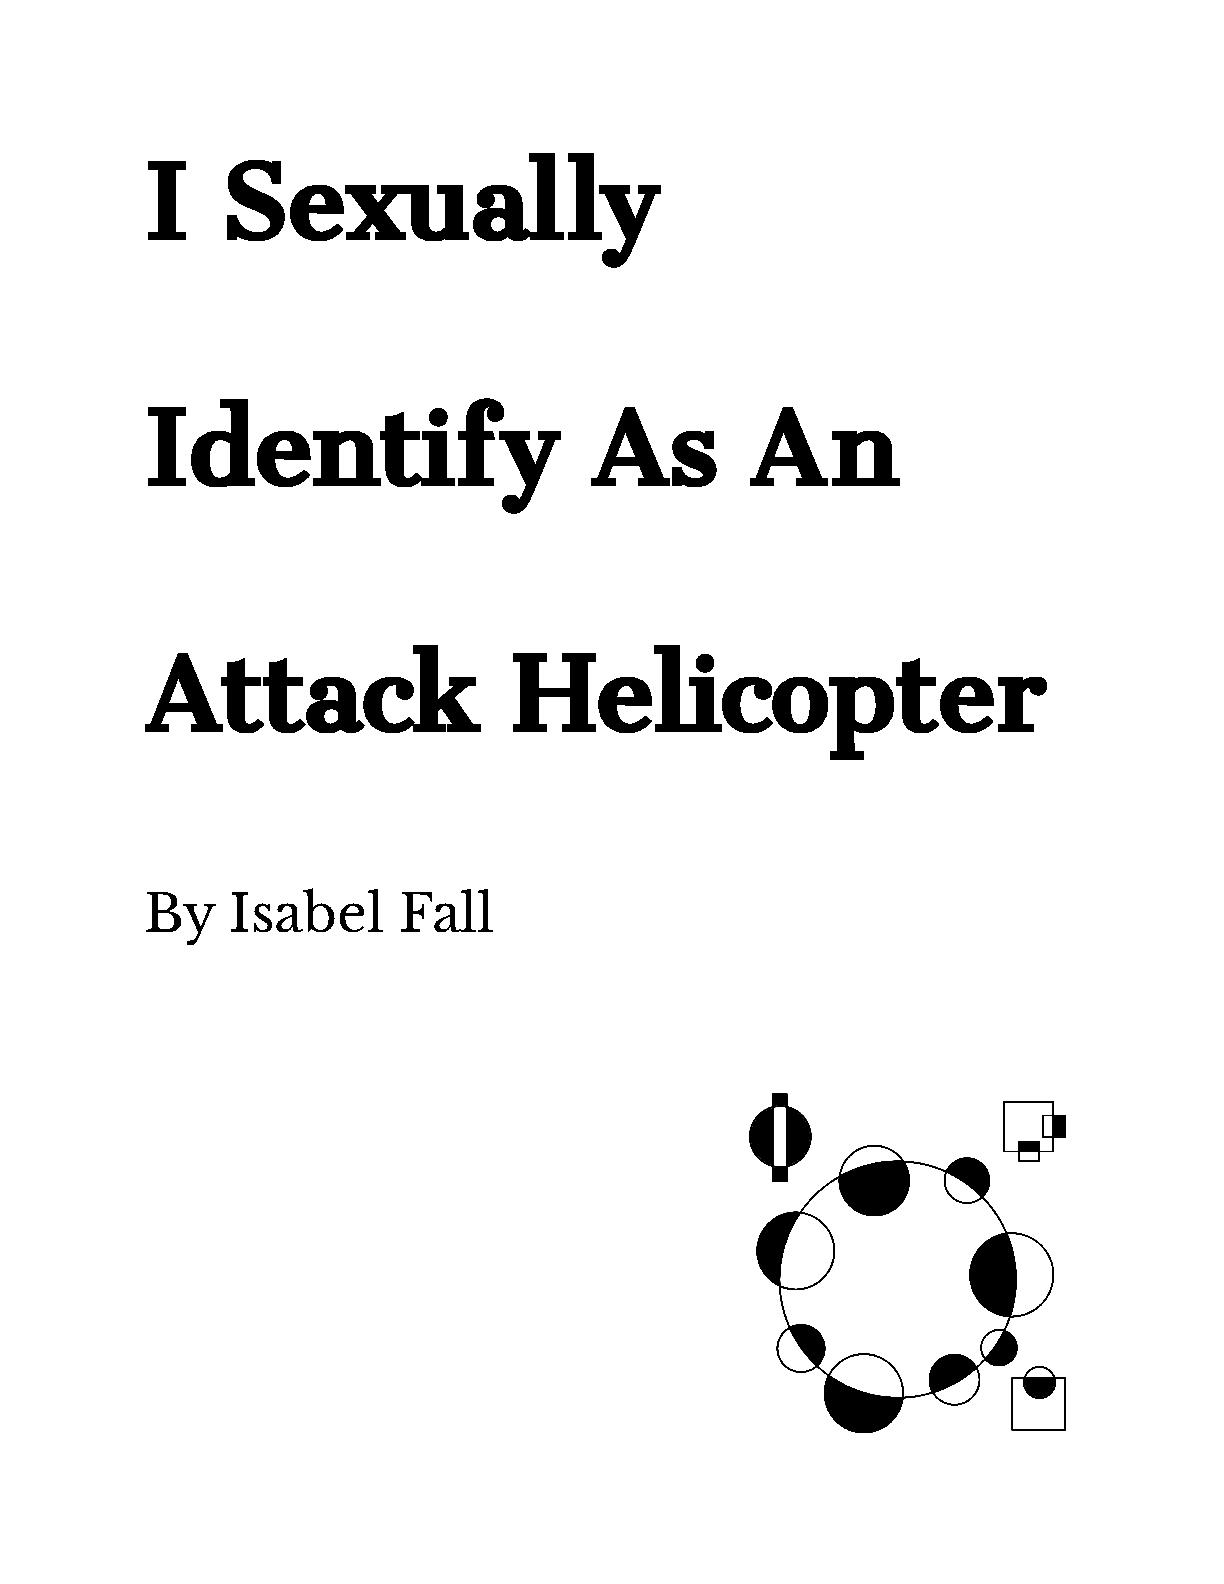 Attack Helicopter by Isabel Fall | PDF Host